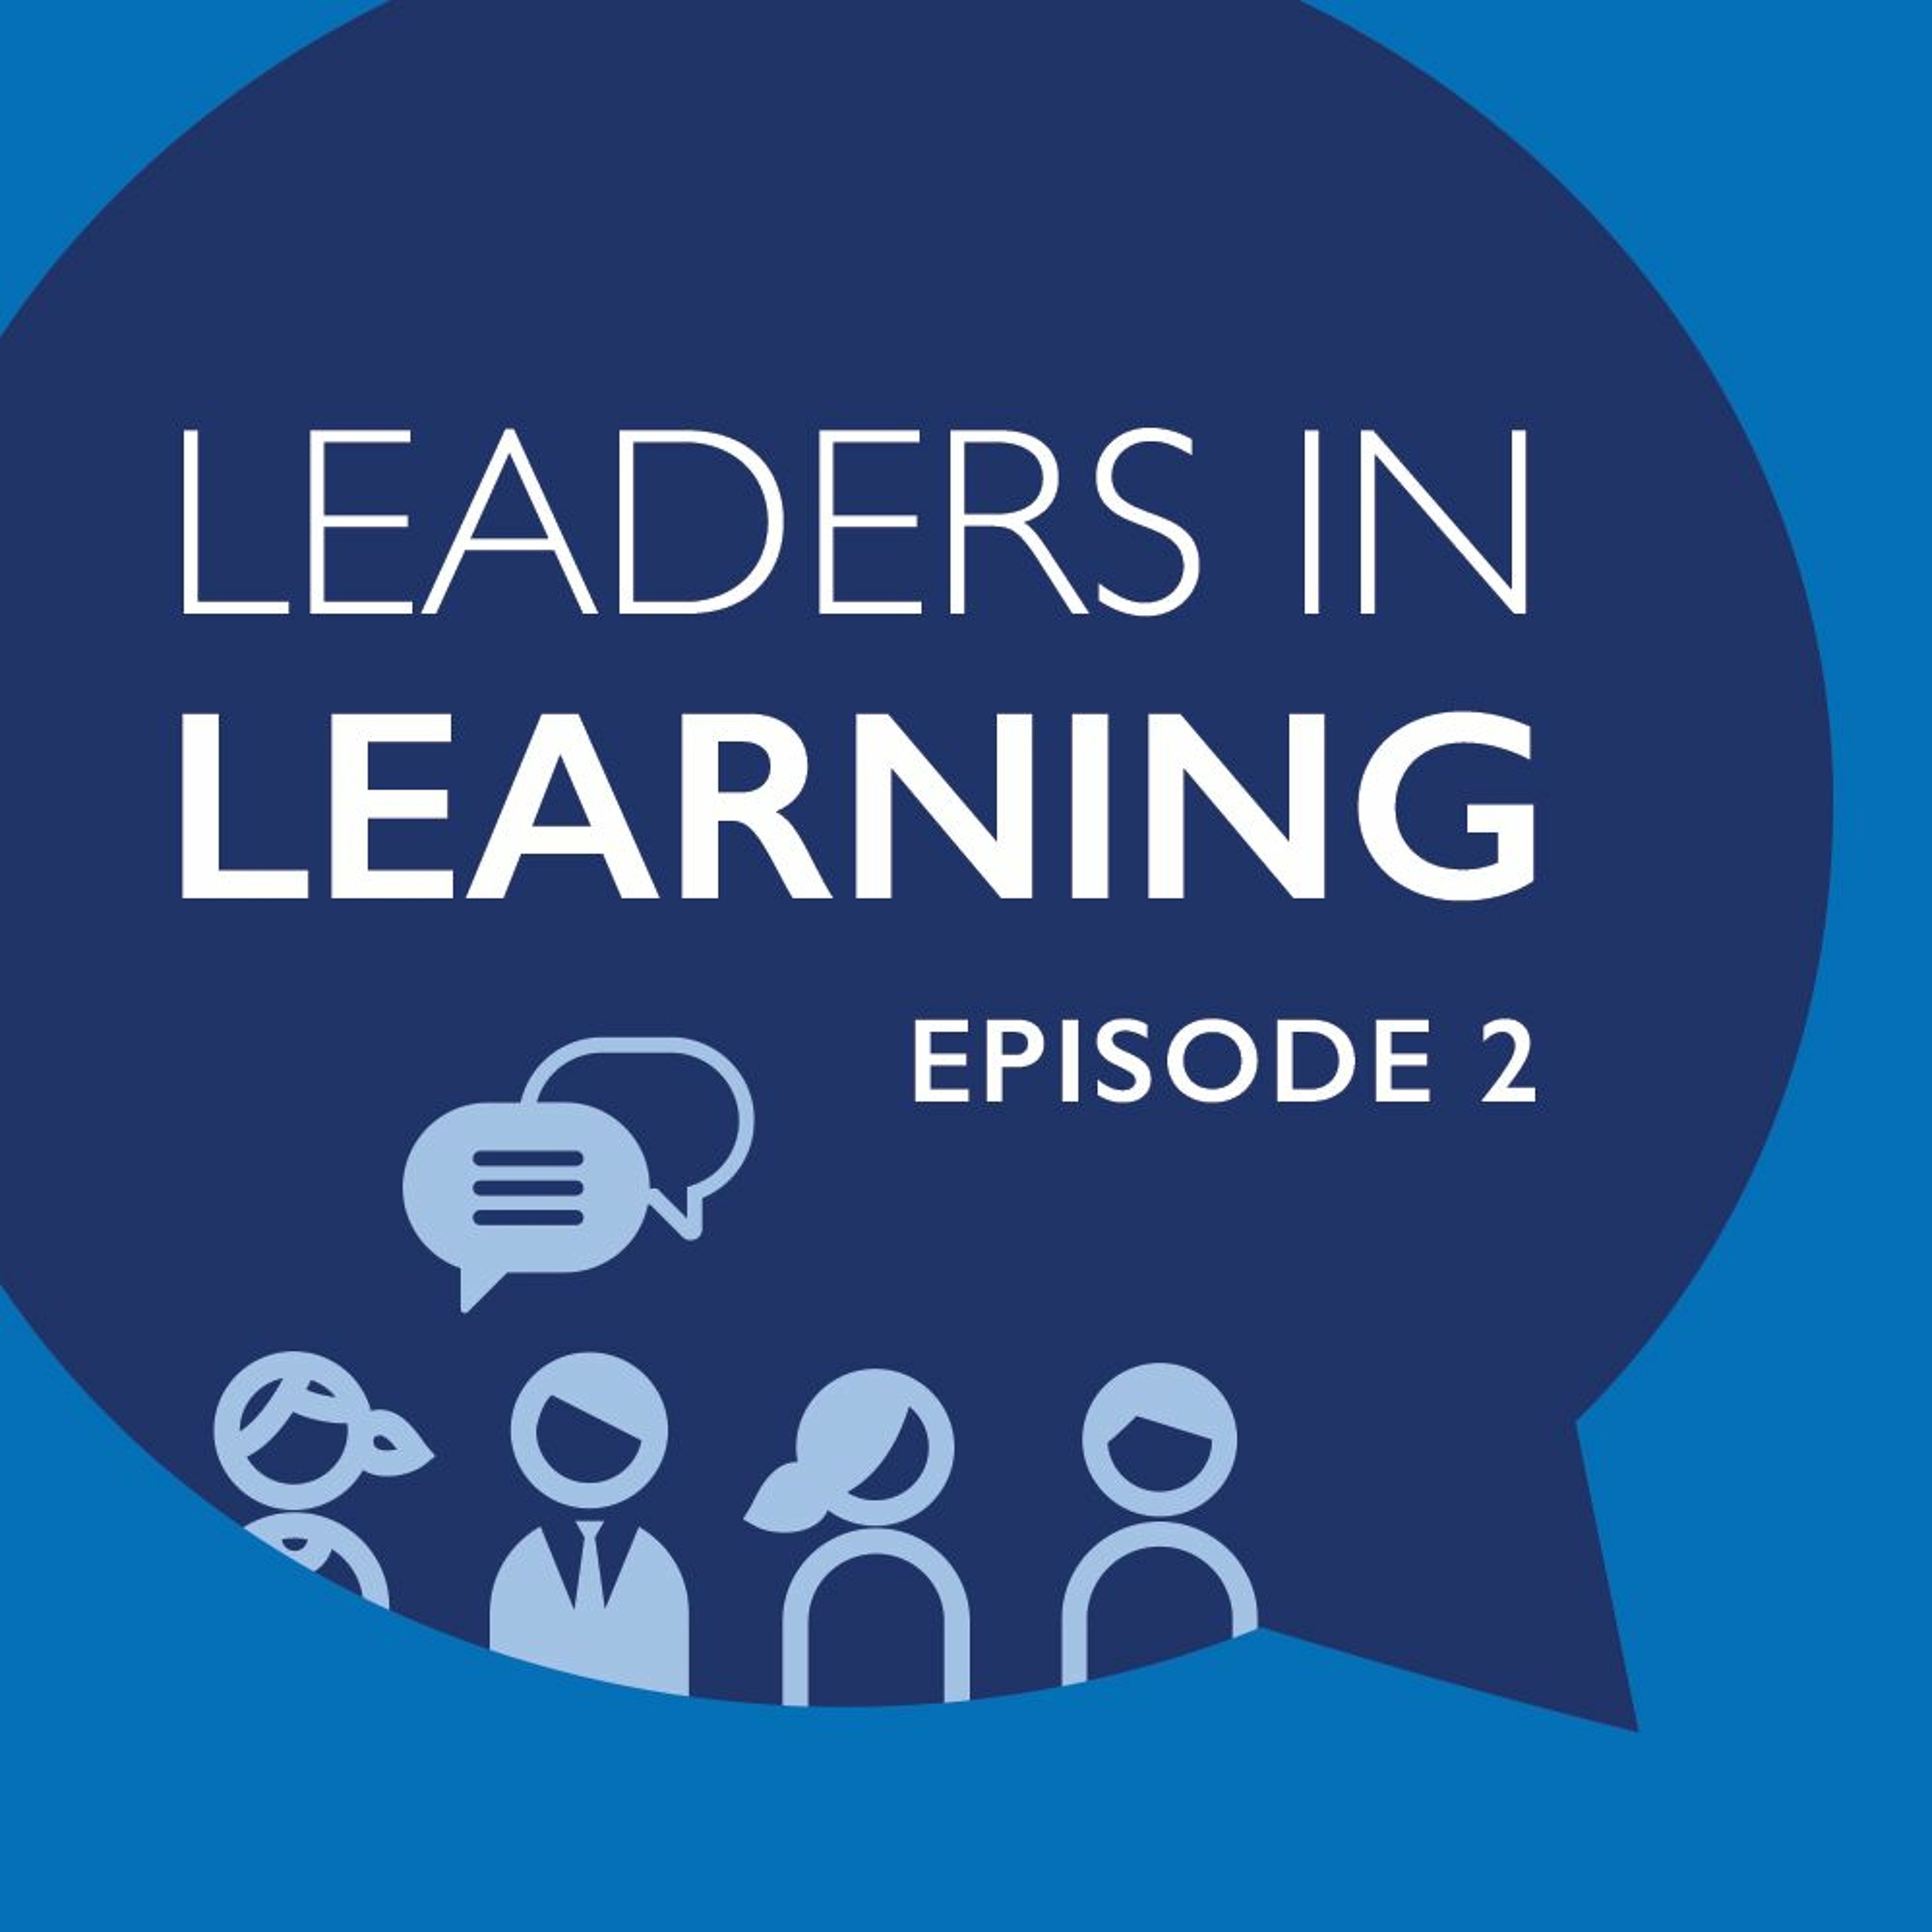 S3 Ep 2: Why does learning matter in international development?